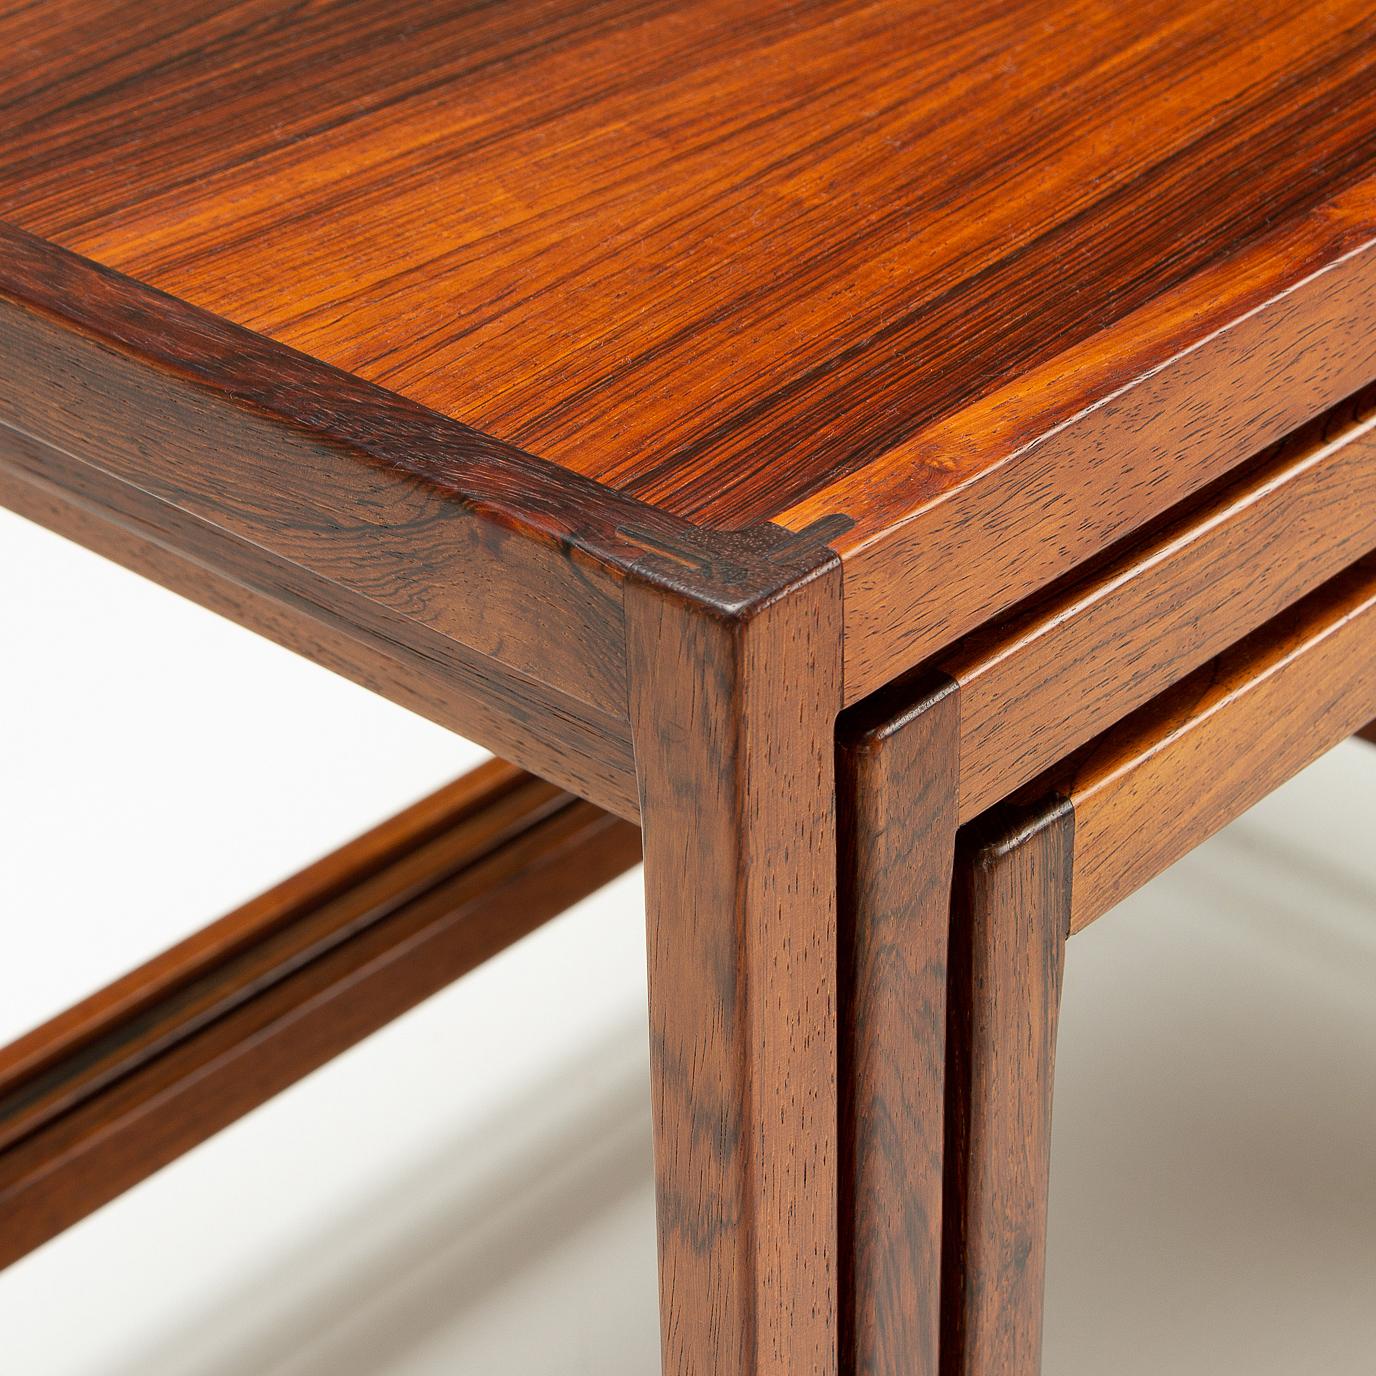 Mid-20th Century Nest of Tables in Rosewood by Kurt Østervig for Jason Møbler, Denmark, 1960s For Sale